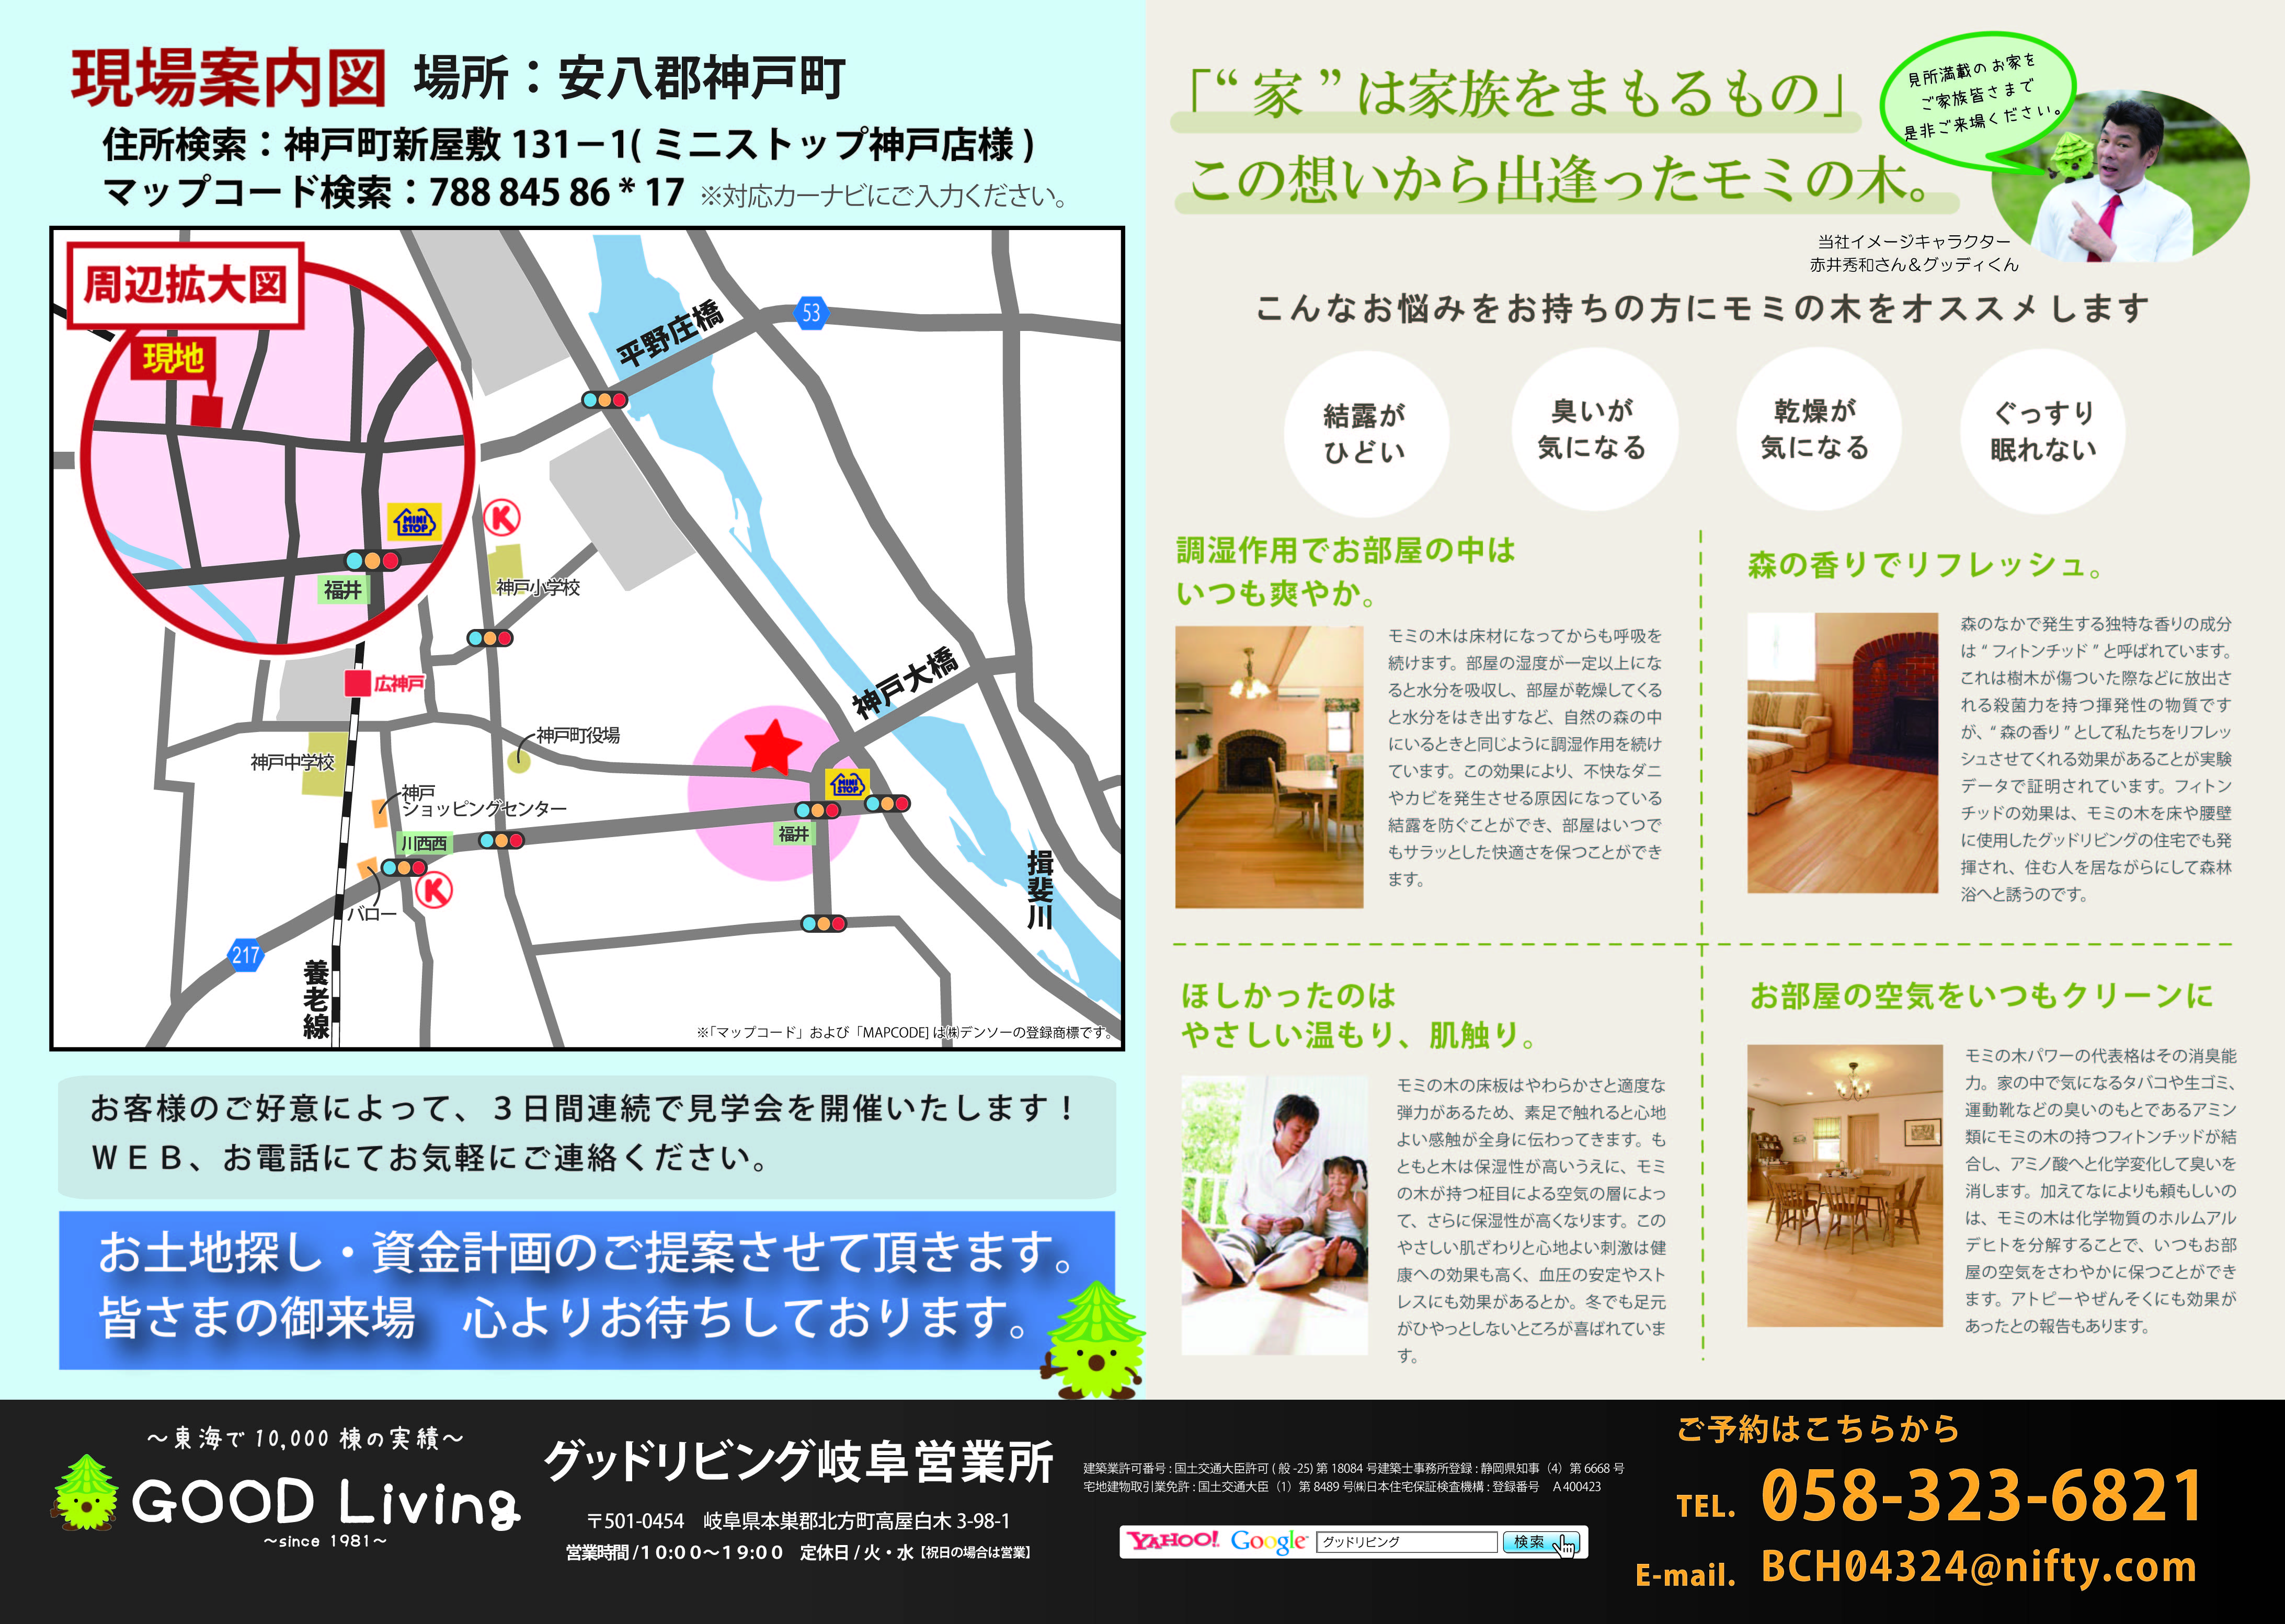 http://good-living.jp/event-information/pic/160130_%E8%97%A4%E4%BA%95%E6%A7%98%E9%82%B8%E8%A6%8B%E5%AD%A6%E4%BC%9AB4-02.jpg